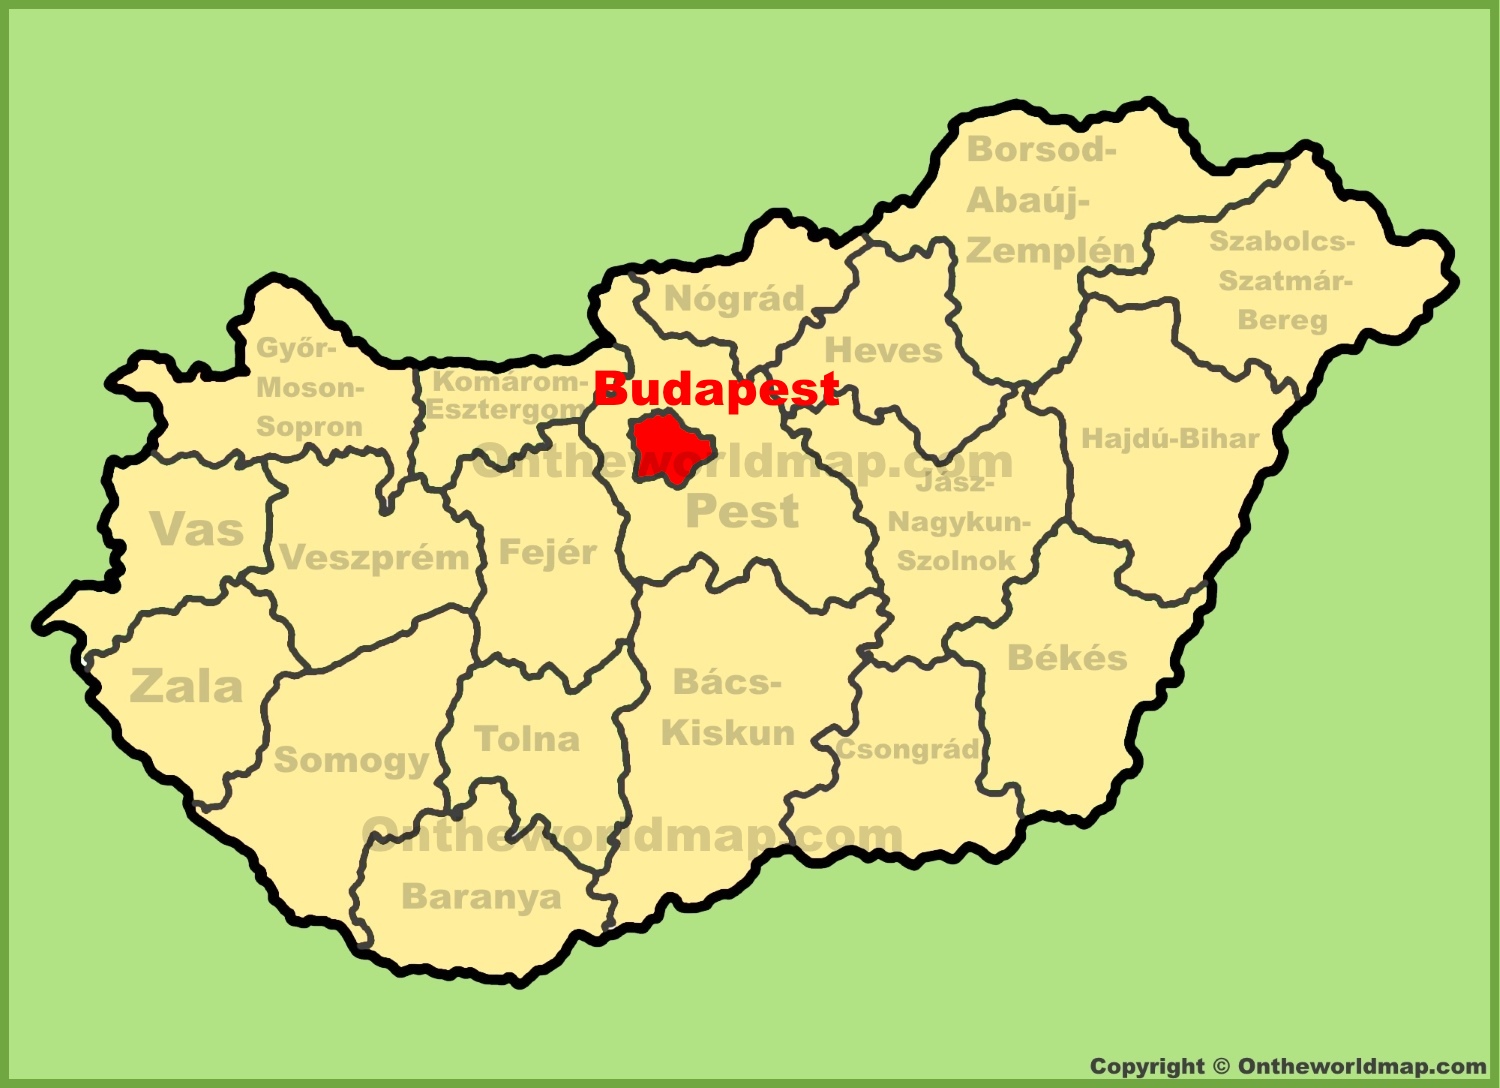 Budapest Location On The Hungary Map